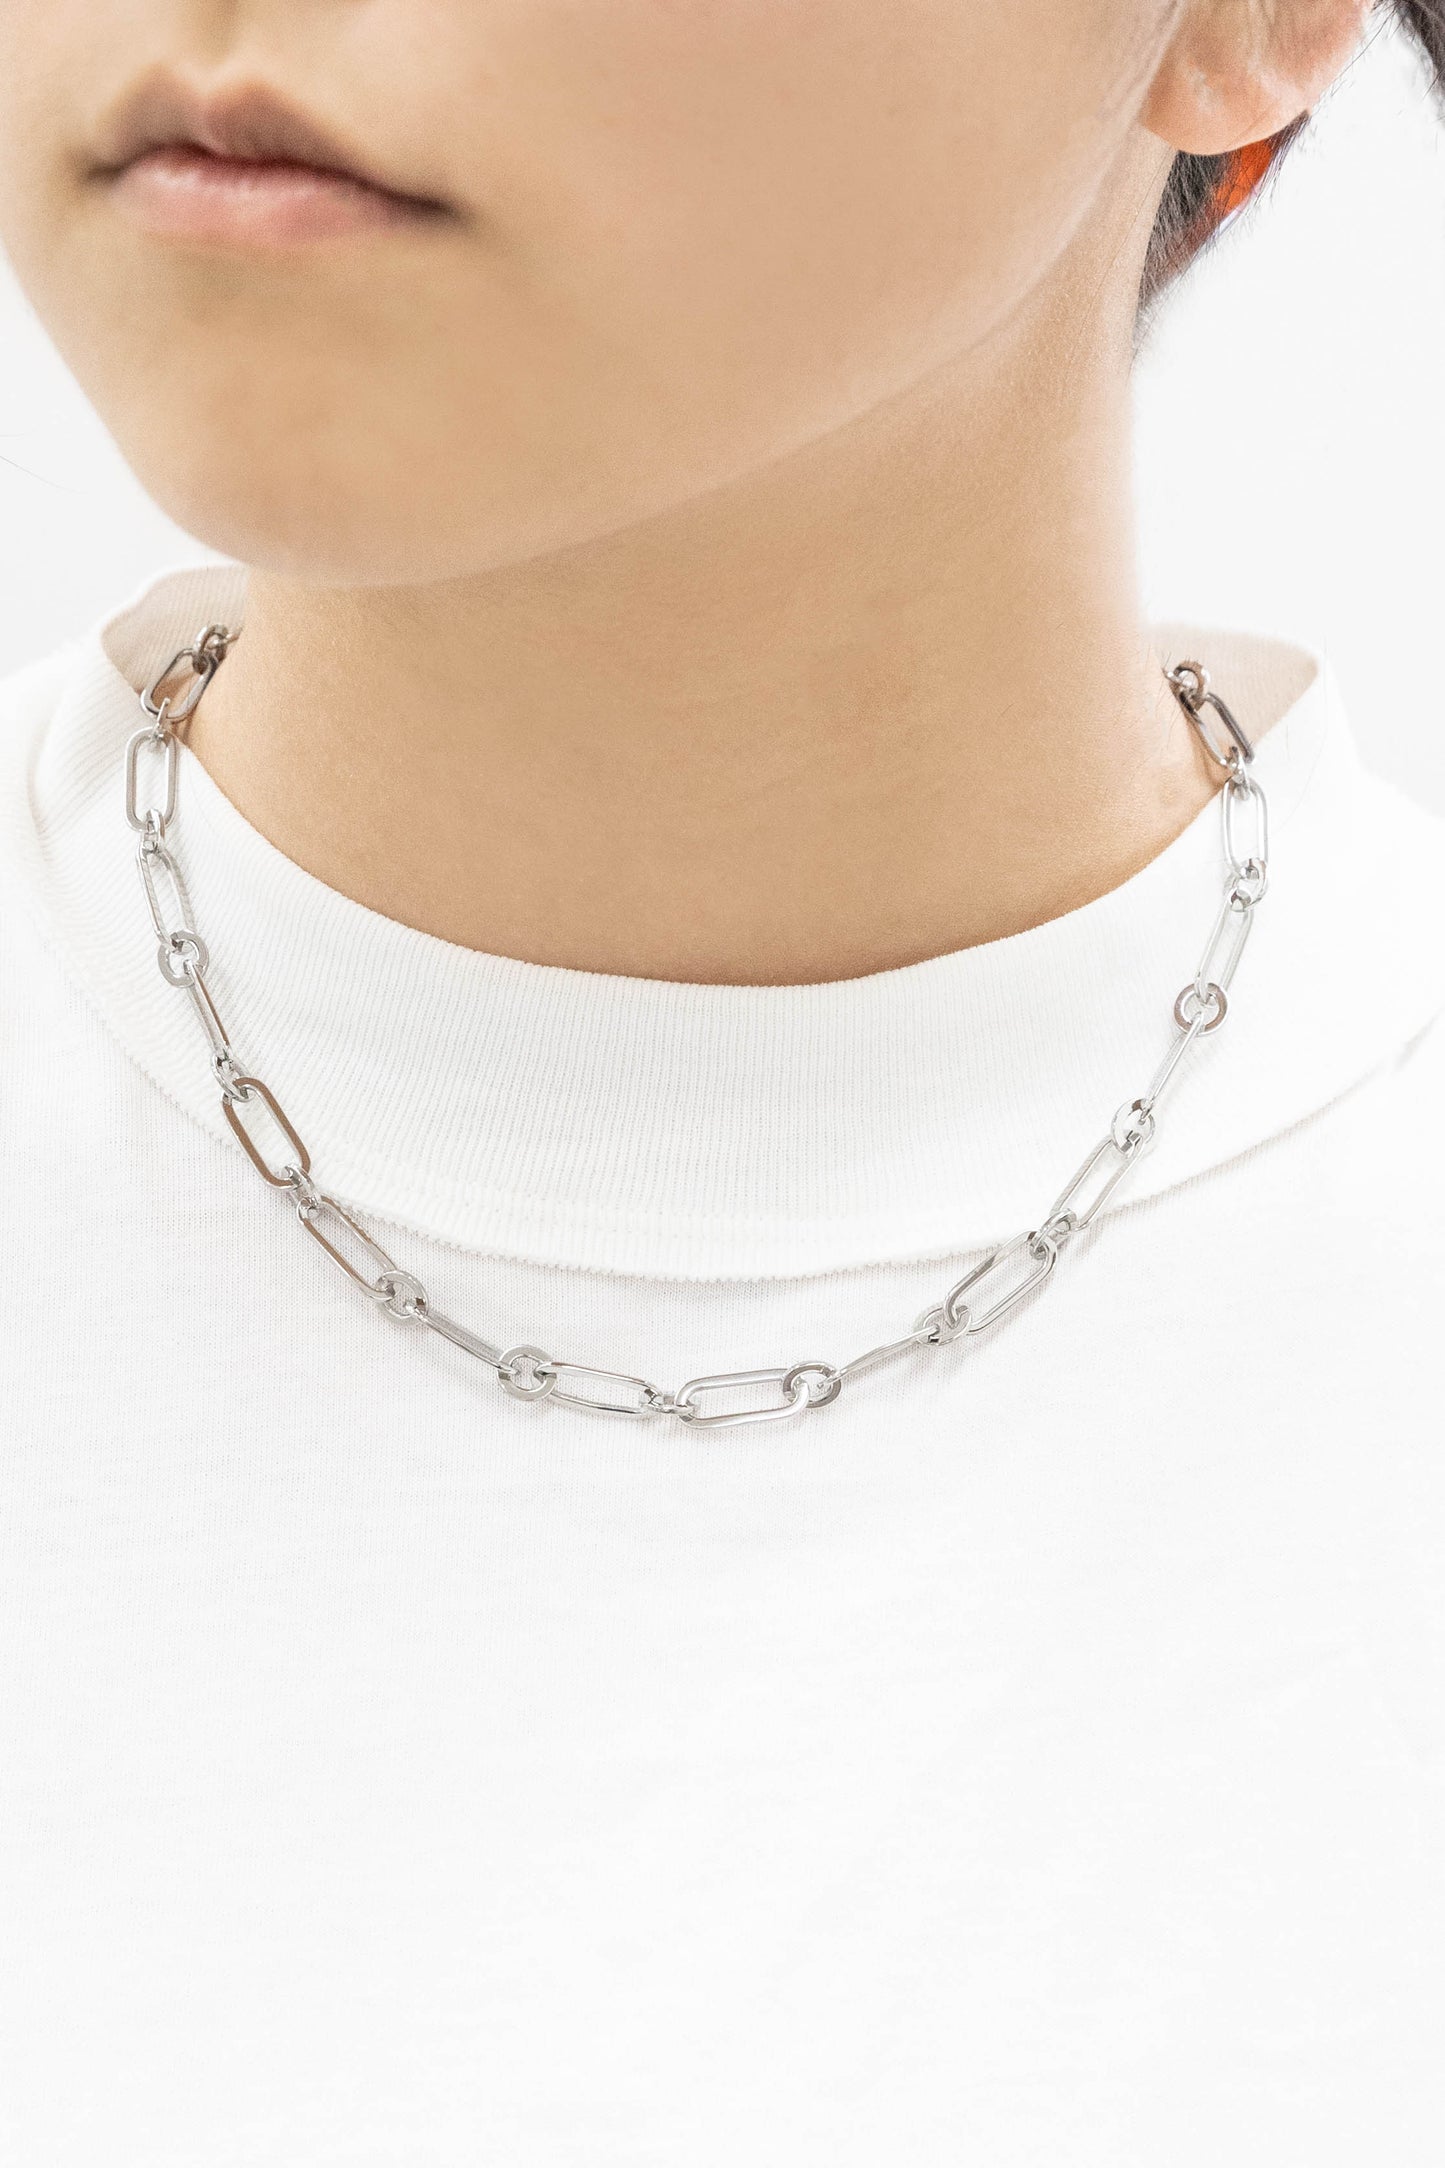 Overawe Large Chain Link Necklace | Silver